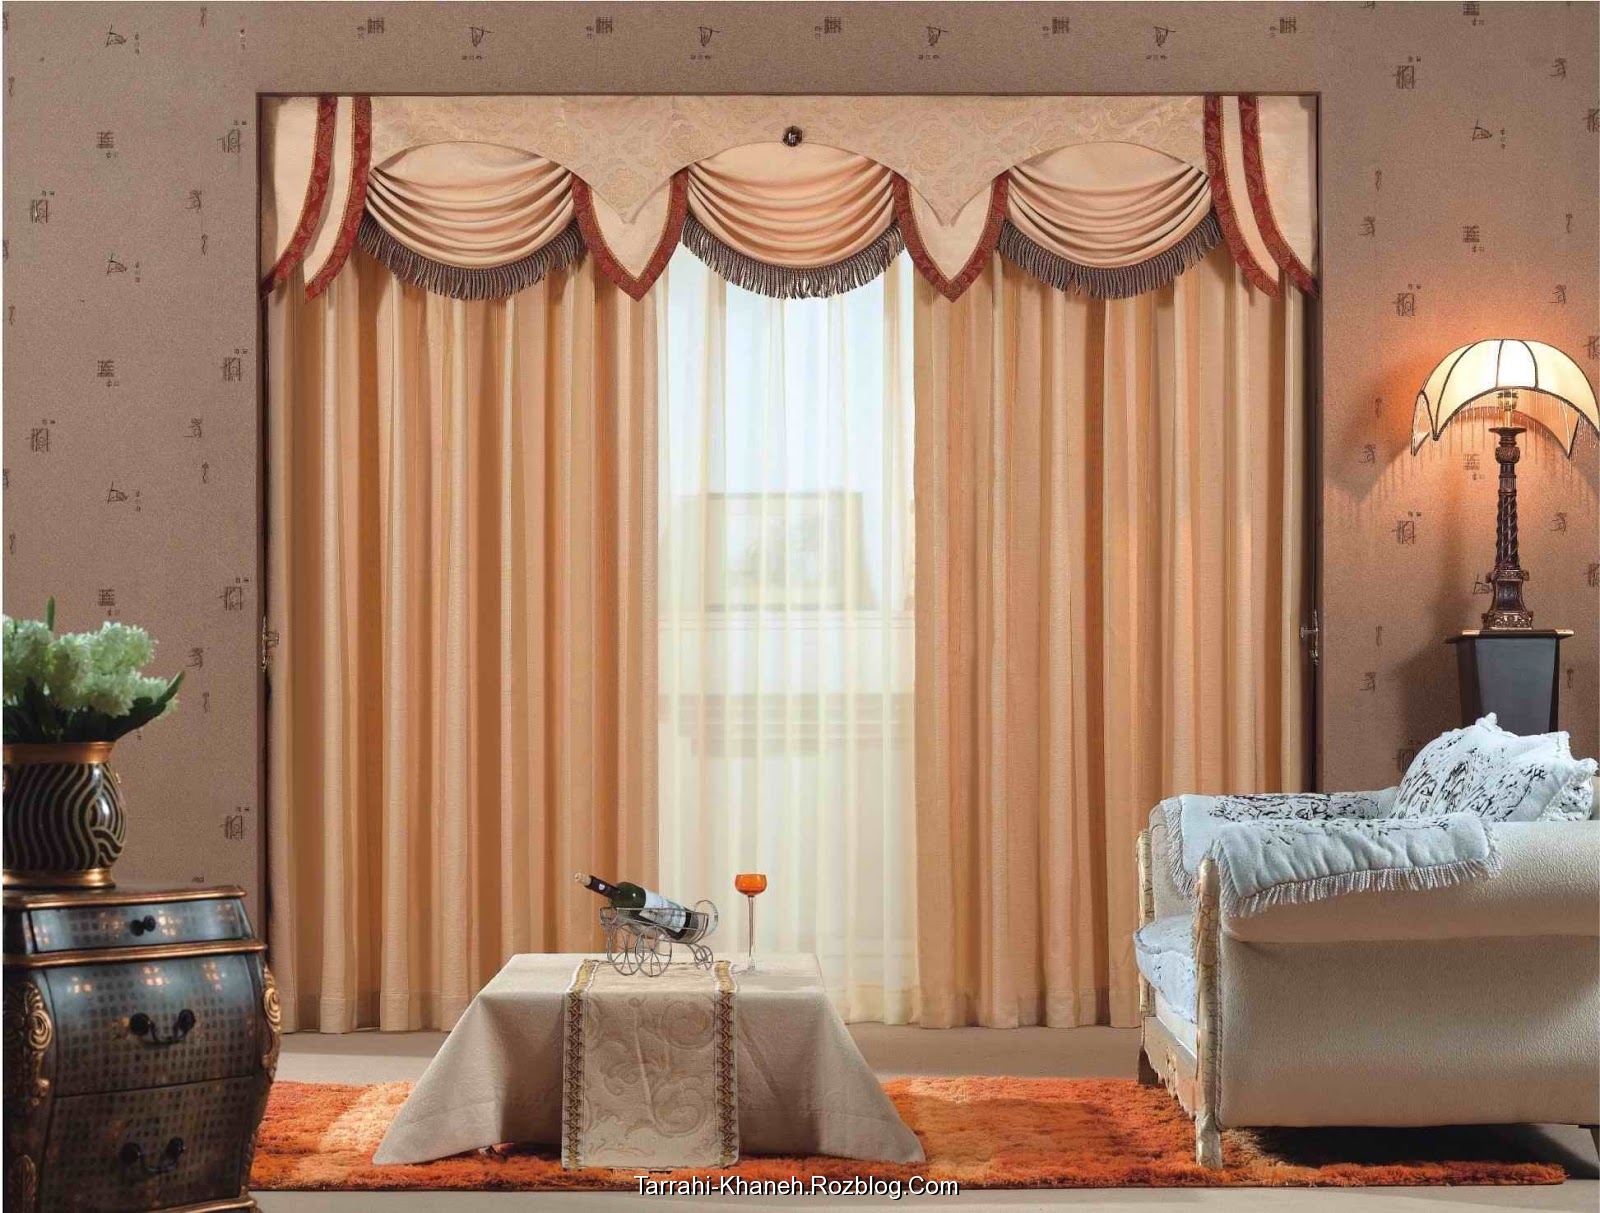 https://rozup.ir/up/tarrahi-khaneh/Pictures/Curtain-Designs/Curtain-Design-Pictures/interior-design-luxury-home-design-a-beautiful-curtain-with-modern-style-for-applied-in-your-window-a-beautiful-accessories-of-curtain-modern-styles-for-windows.jpg